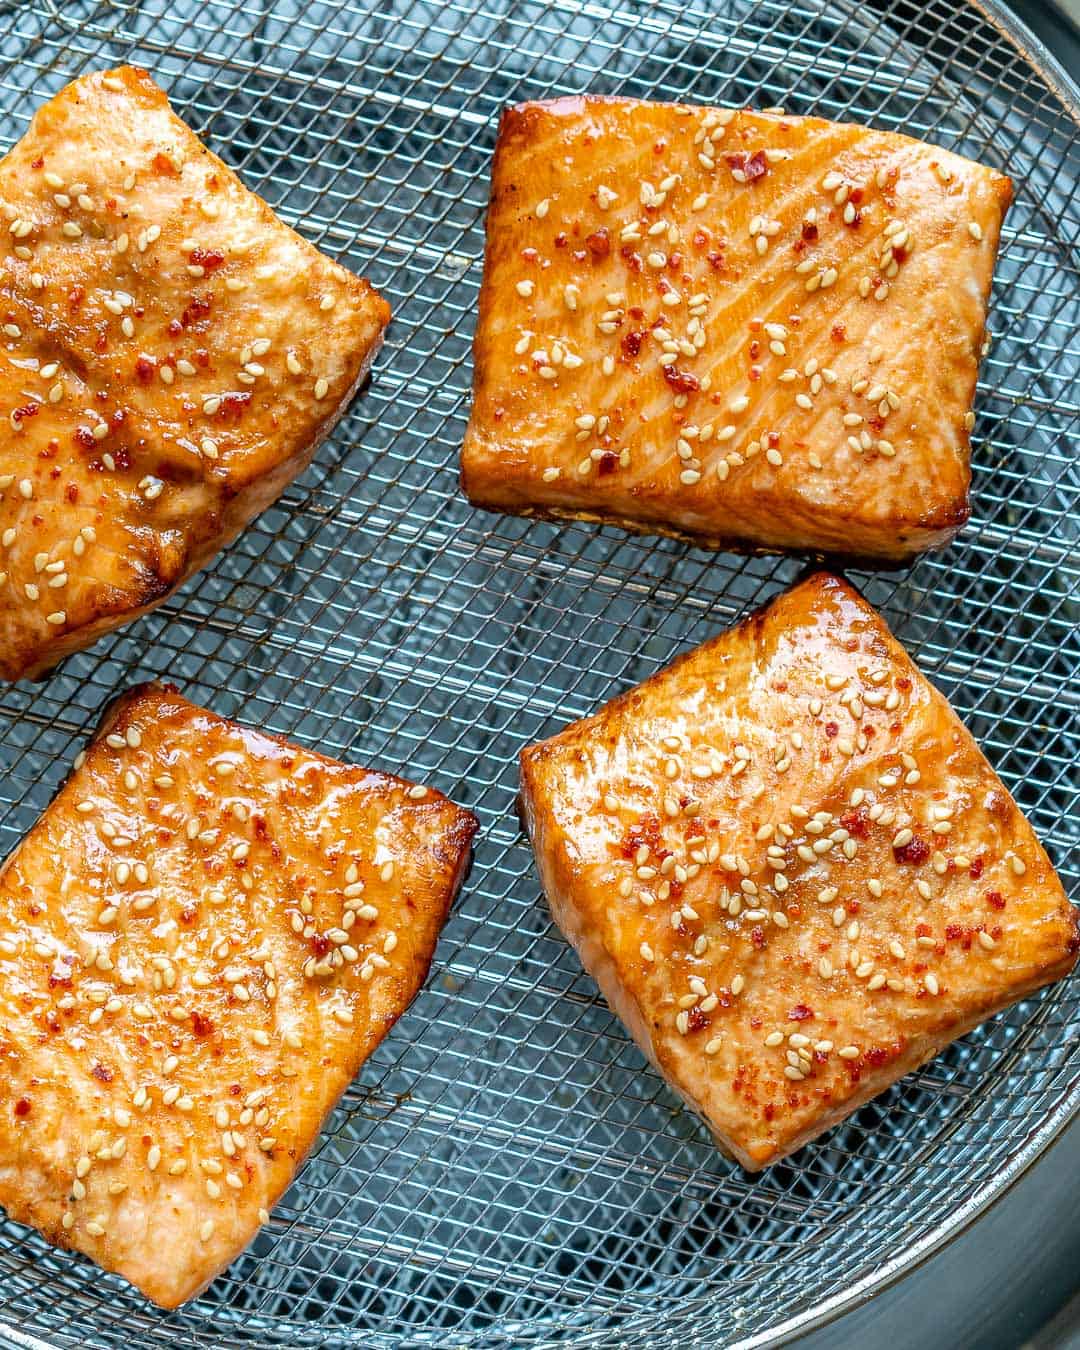 Sprinkle with sesame seeds and chili flakes